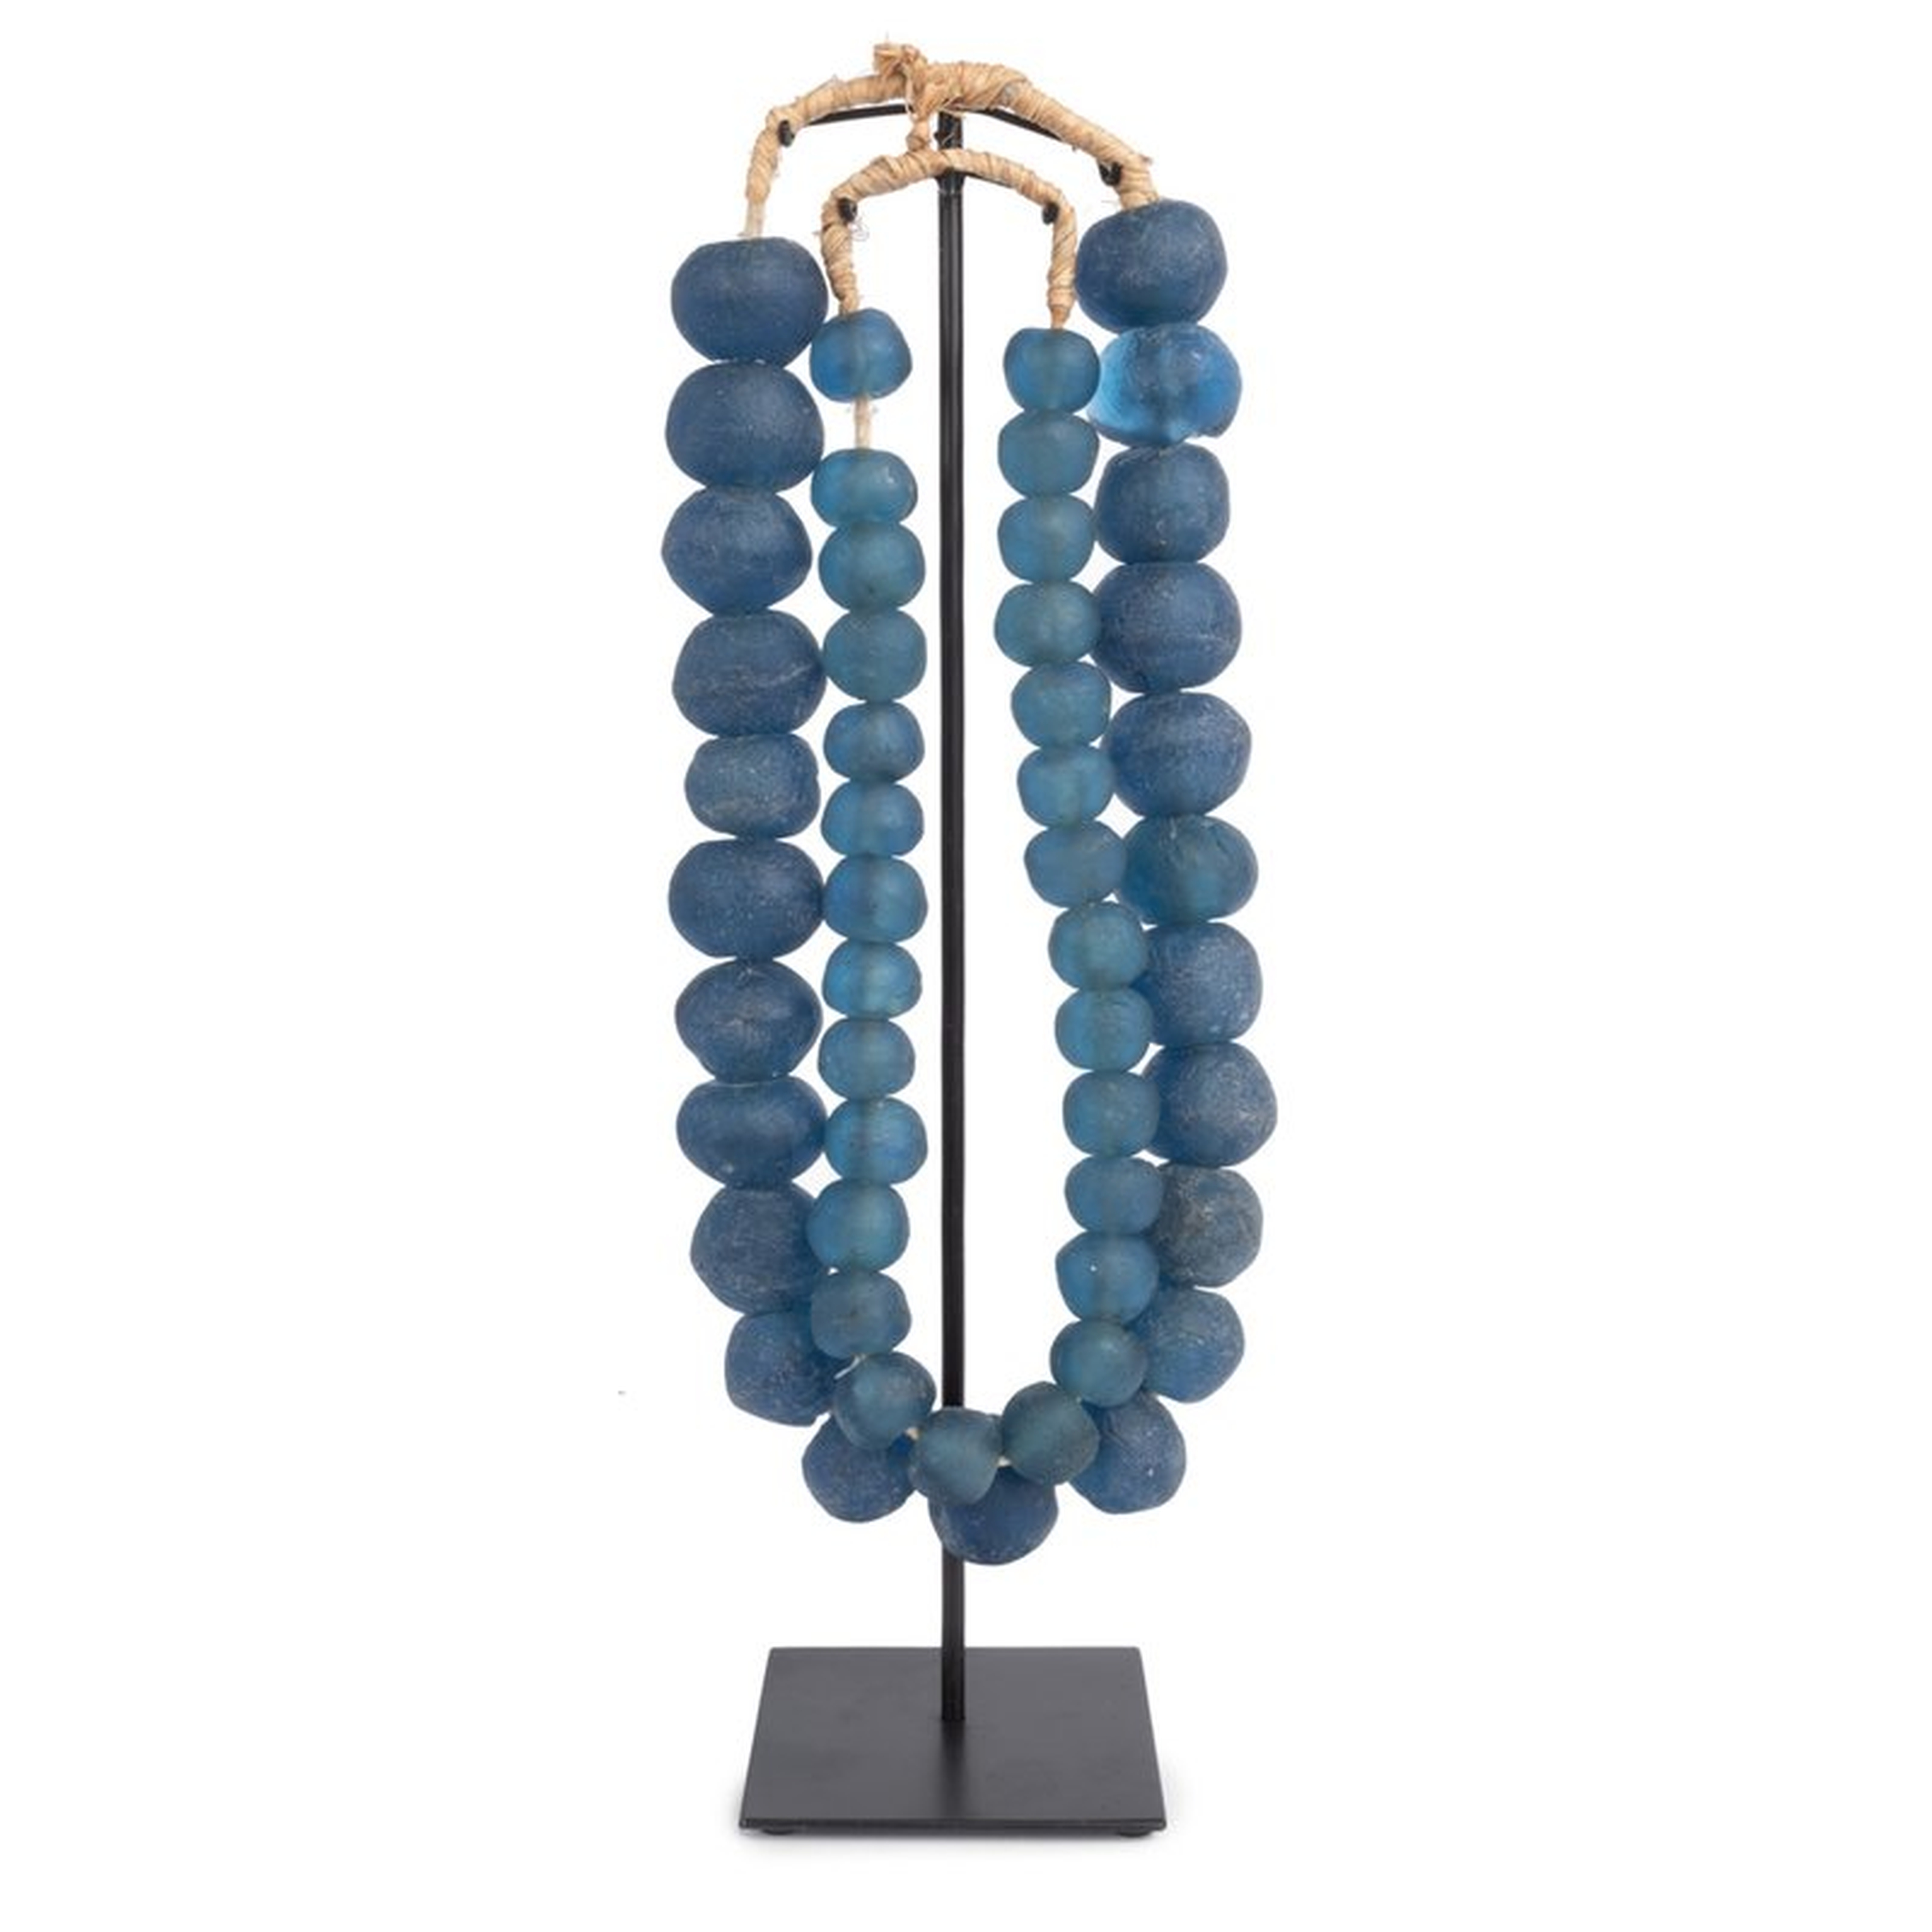 GHANIAN DOUBLE GLASS BEADS ON STAND SCULPTURE - Perigold